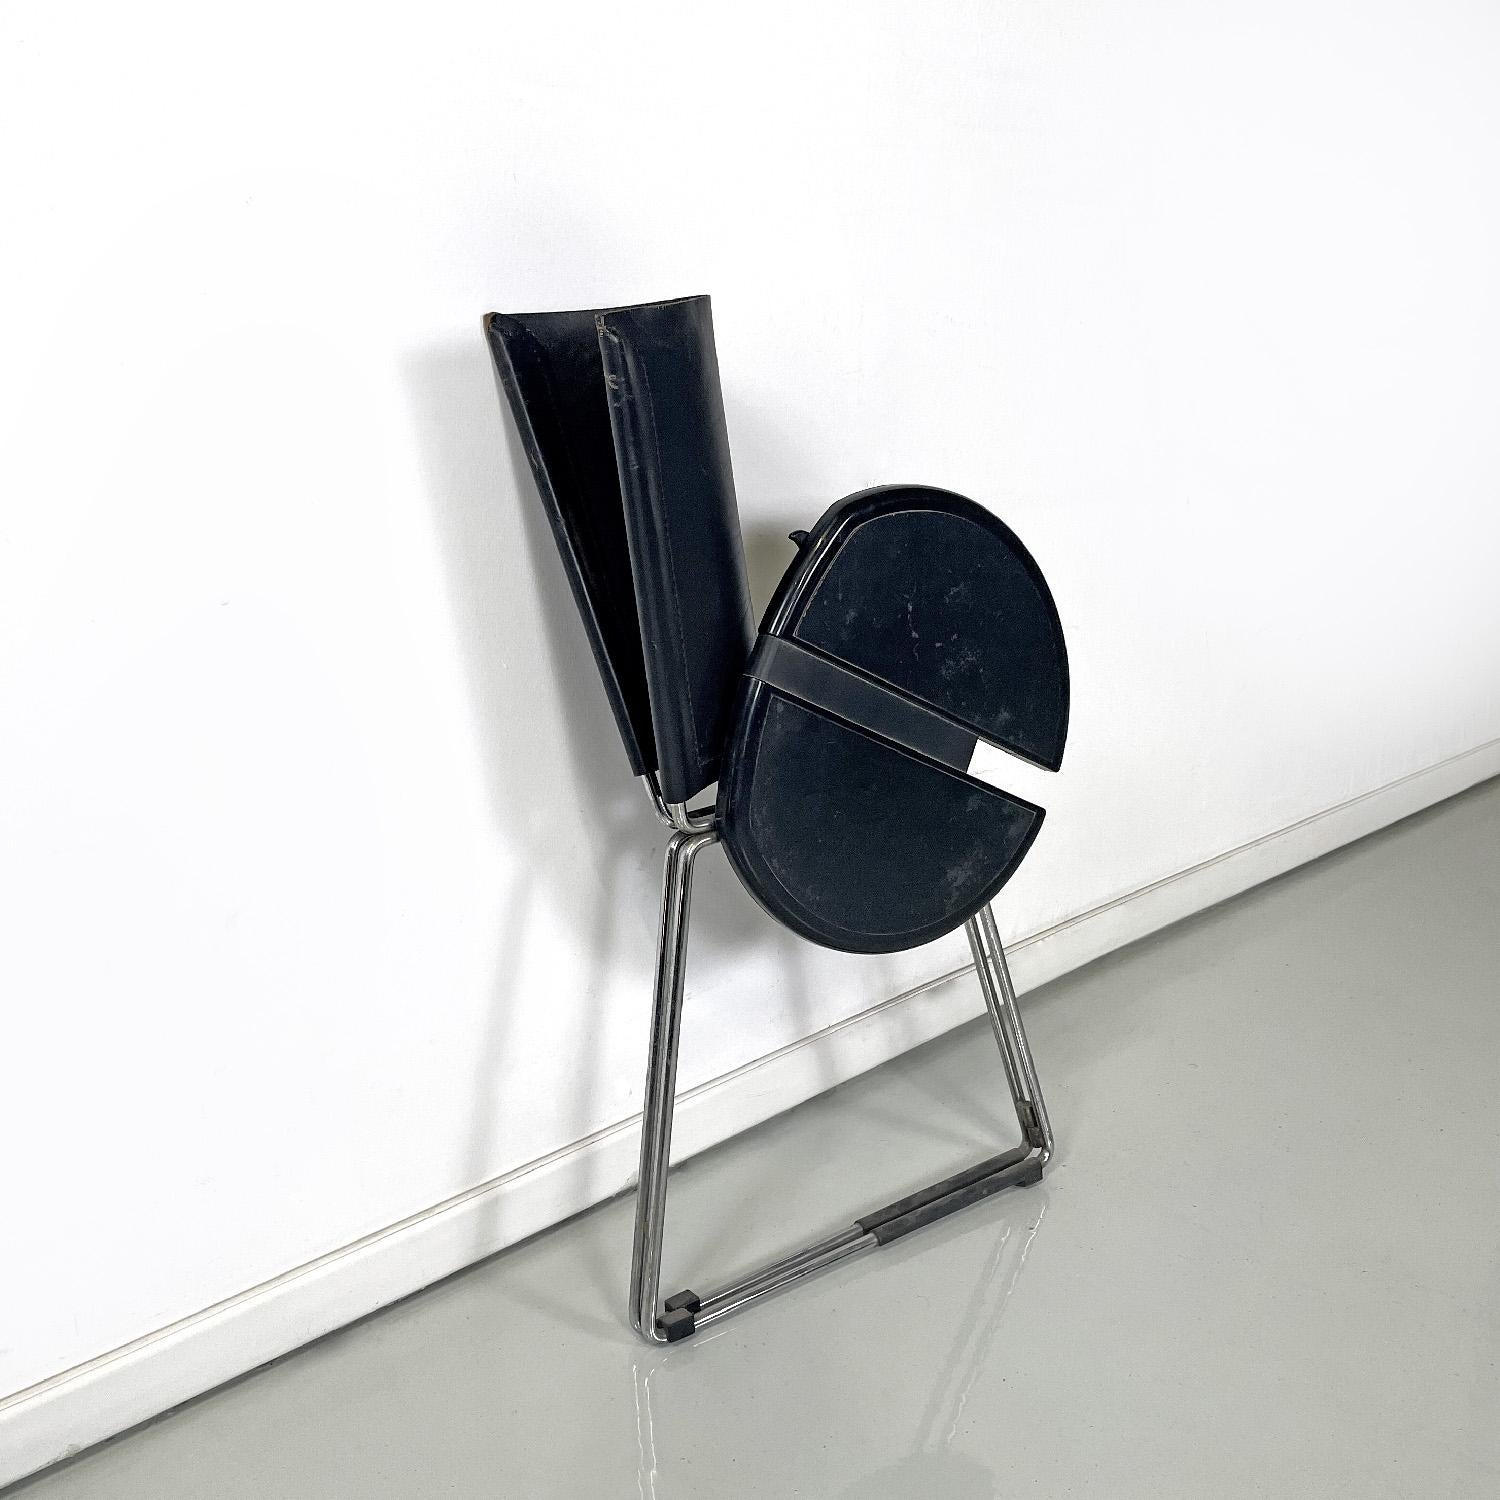 Metal Italian modern black chair Terna by Gaspare Cairoli for Seccose, 1980s For Sale